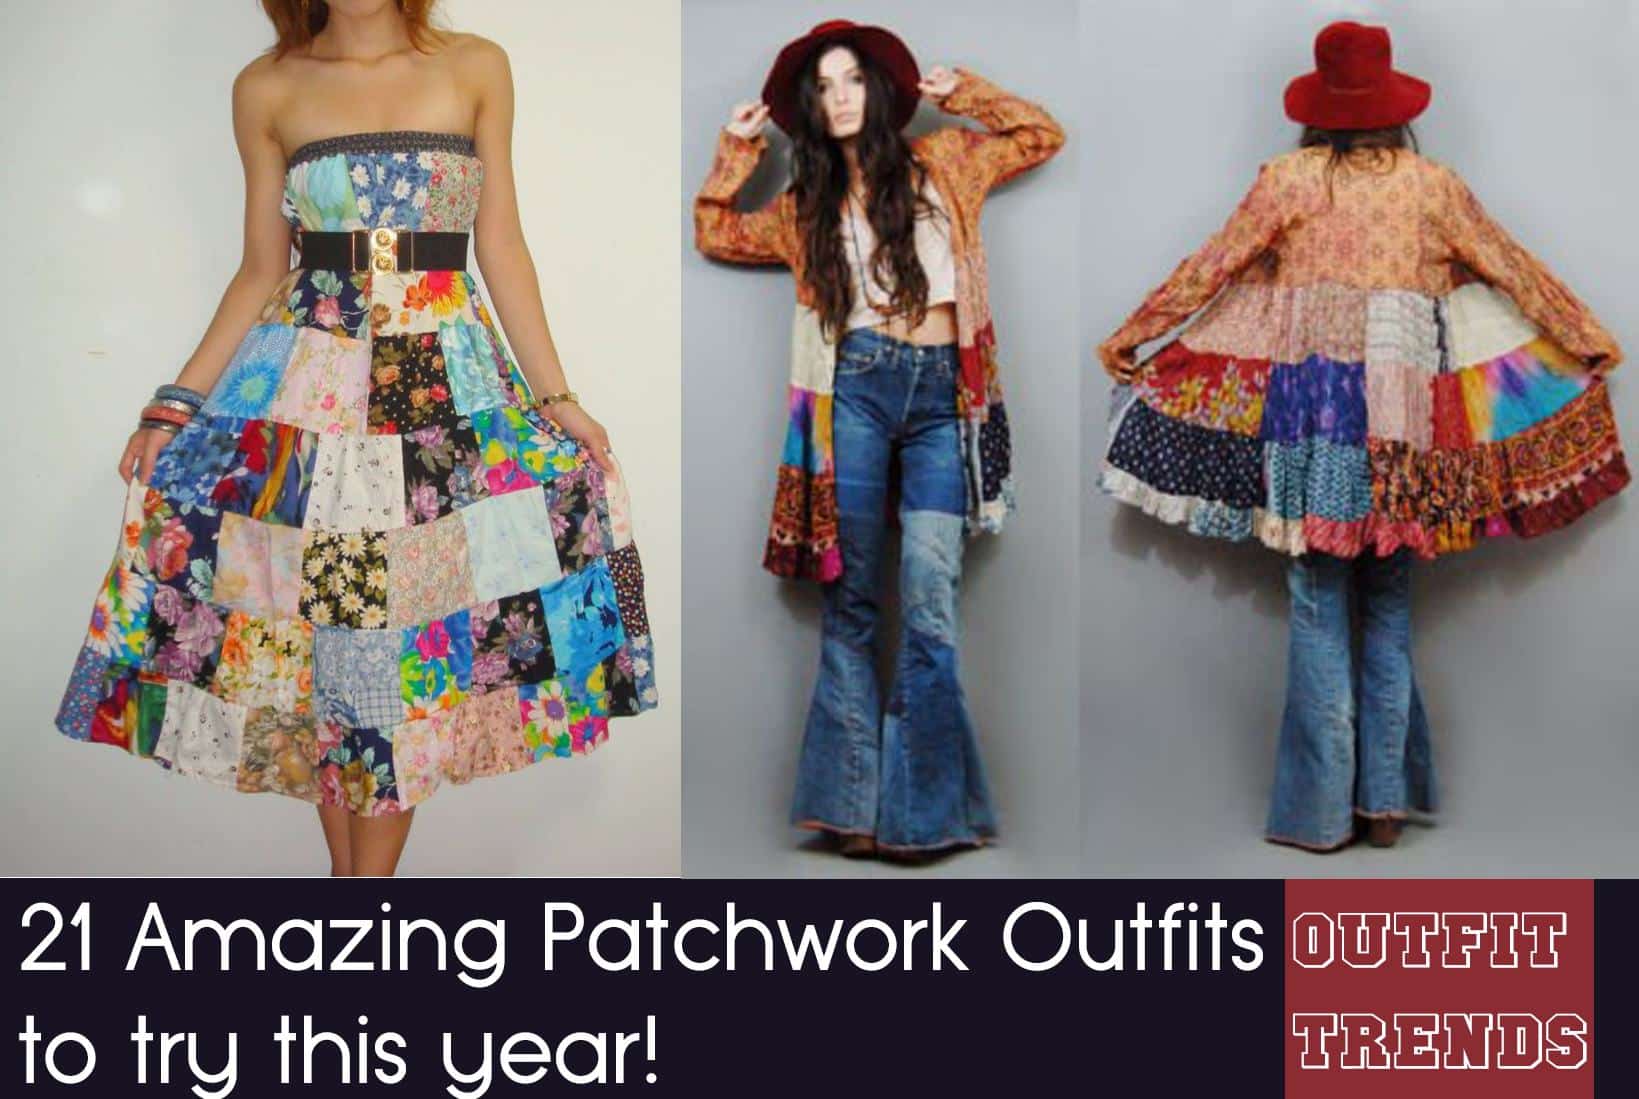 Patchwork Outfits-22 Ways to Wear Patchwork Outfits this Year